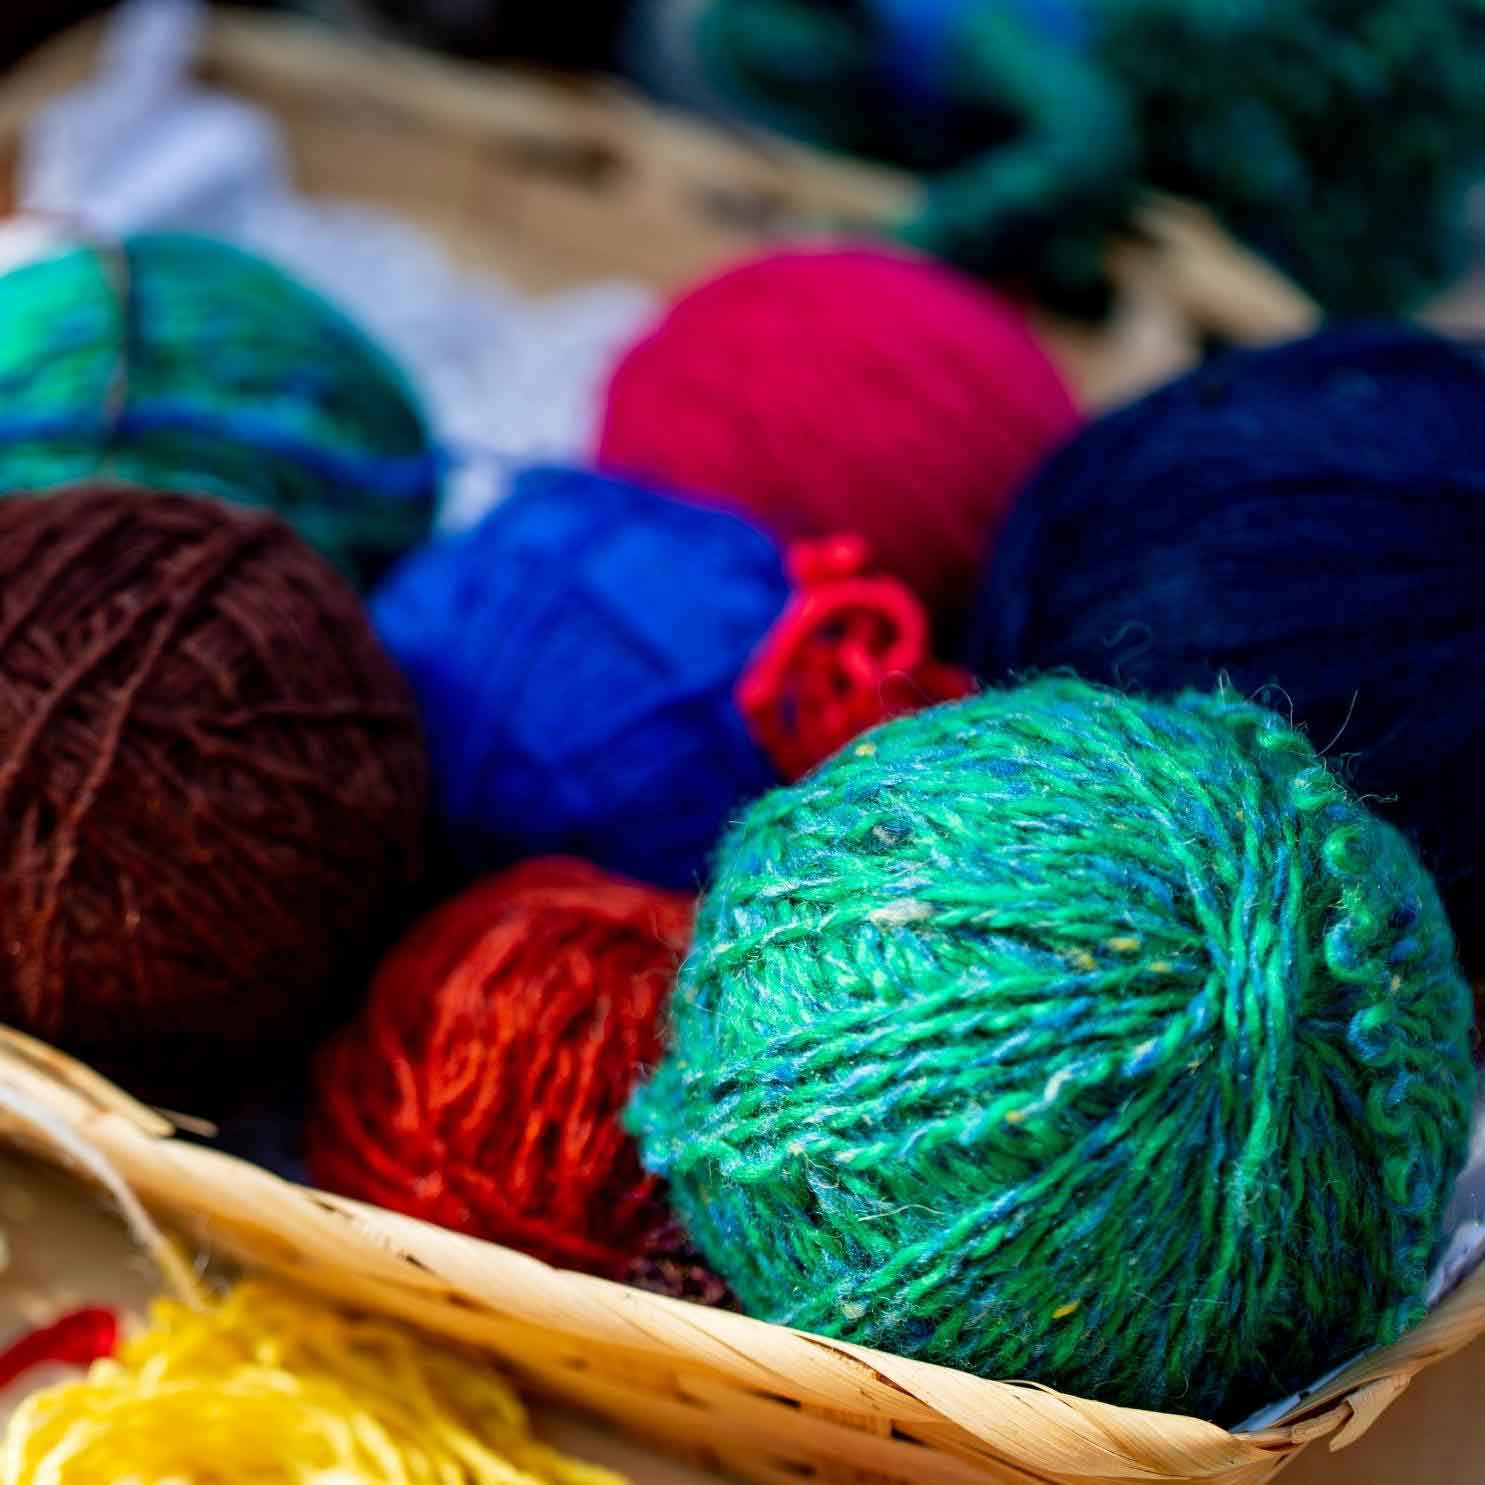 Interested in knitting or crocheting?